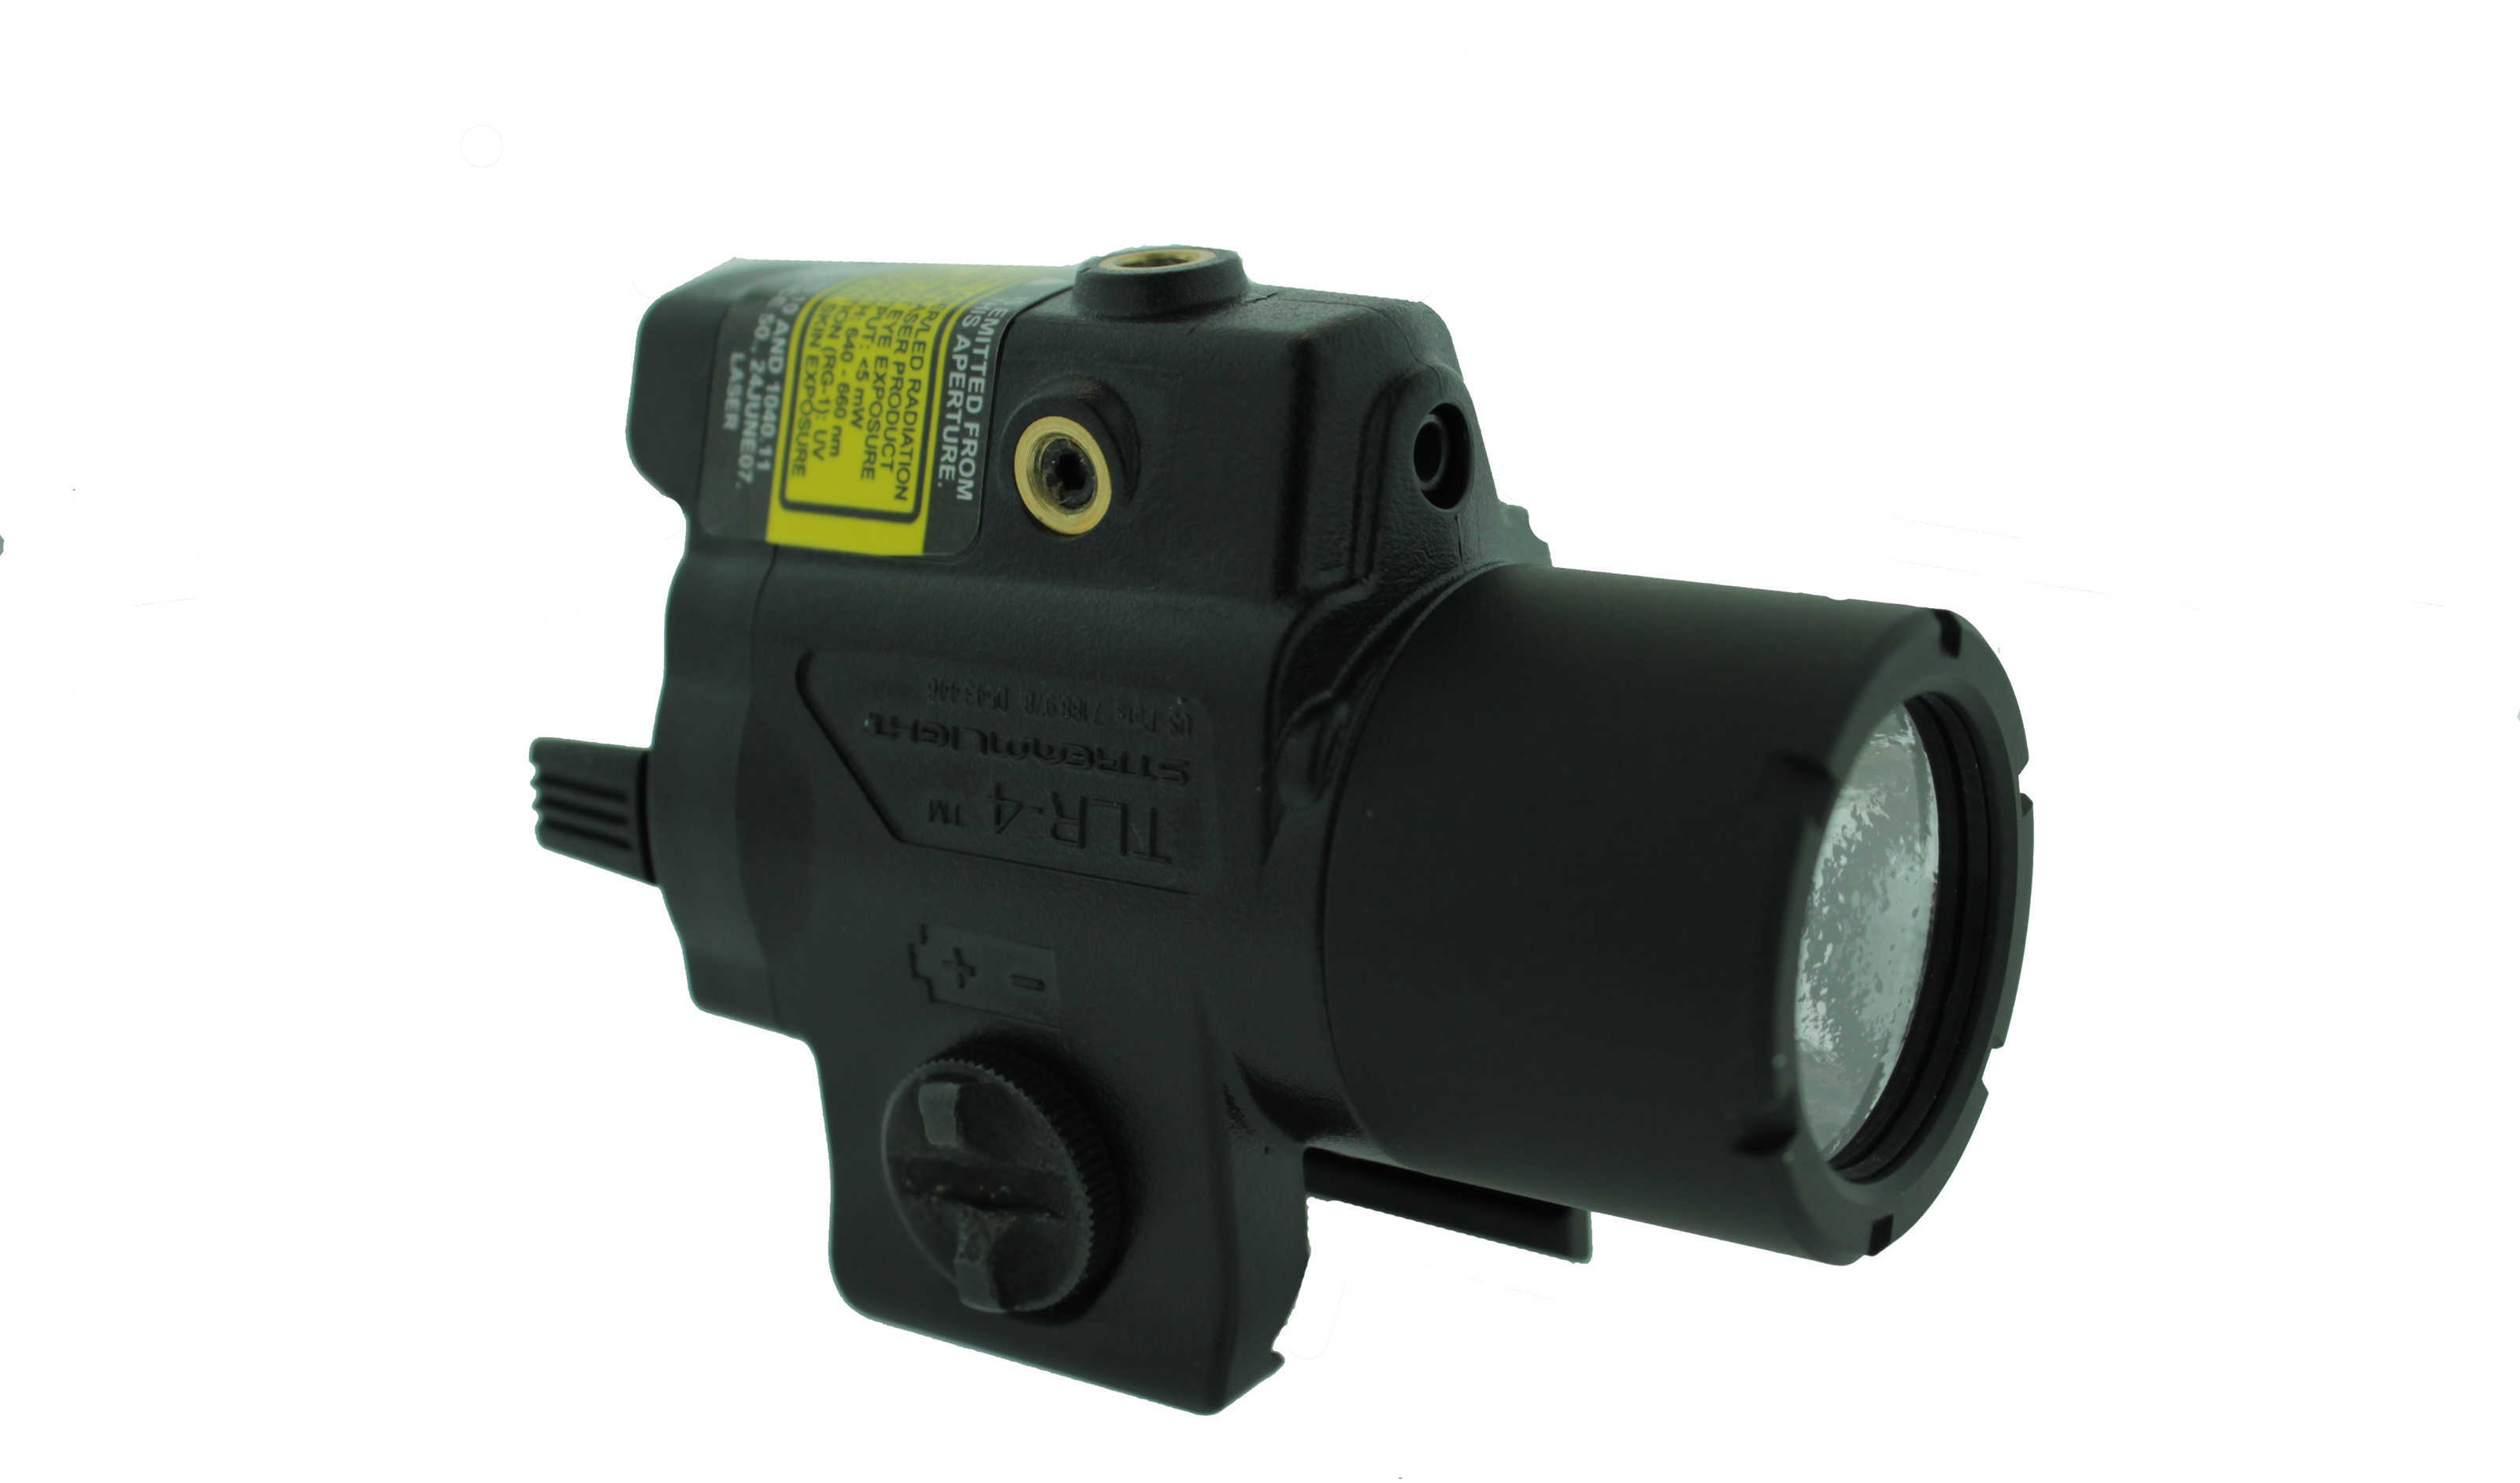 Streamlight TLR-4 USP Compact 69241